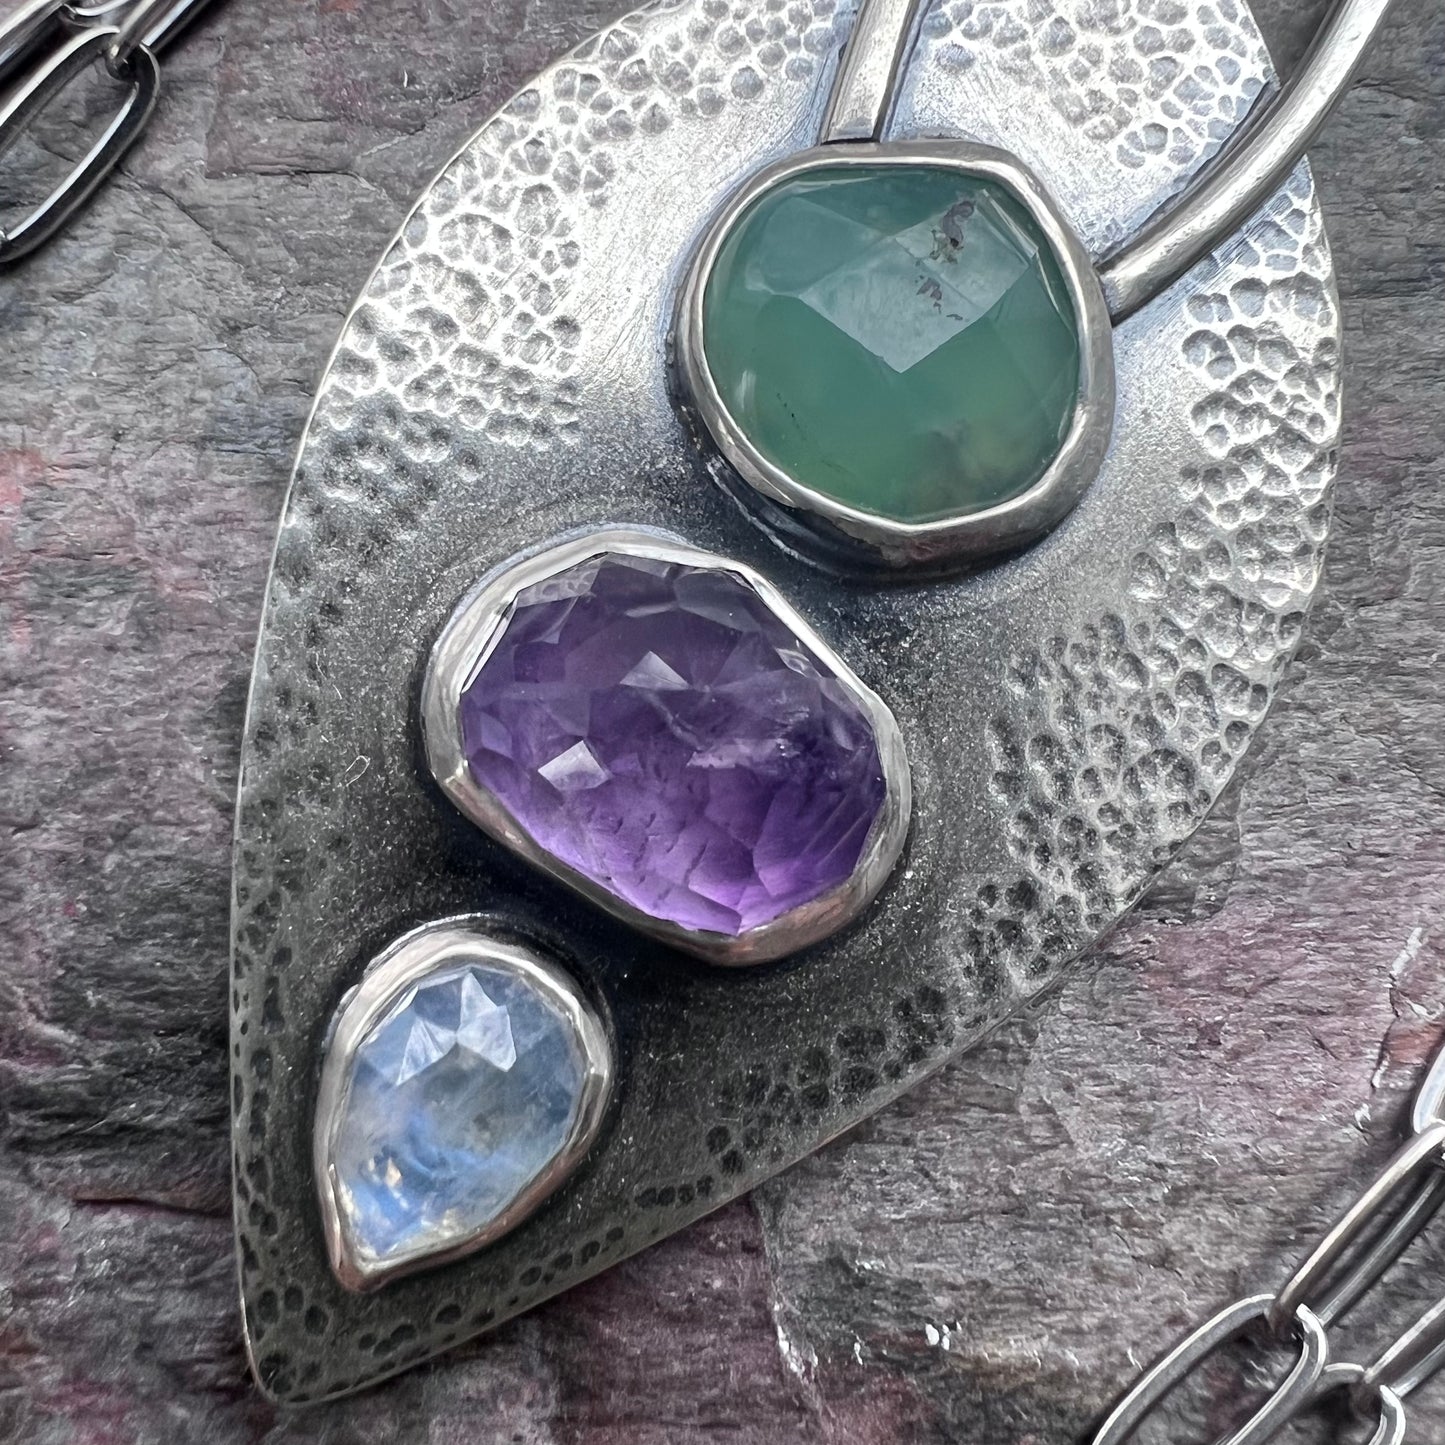 Chrysoprase, Amethyst, and Rainbow Moonstone Sterling Silver Necklace - Handmade One-of-a-kind Pendant on Sterling Silver Chain